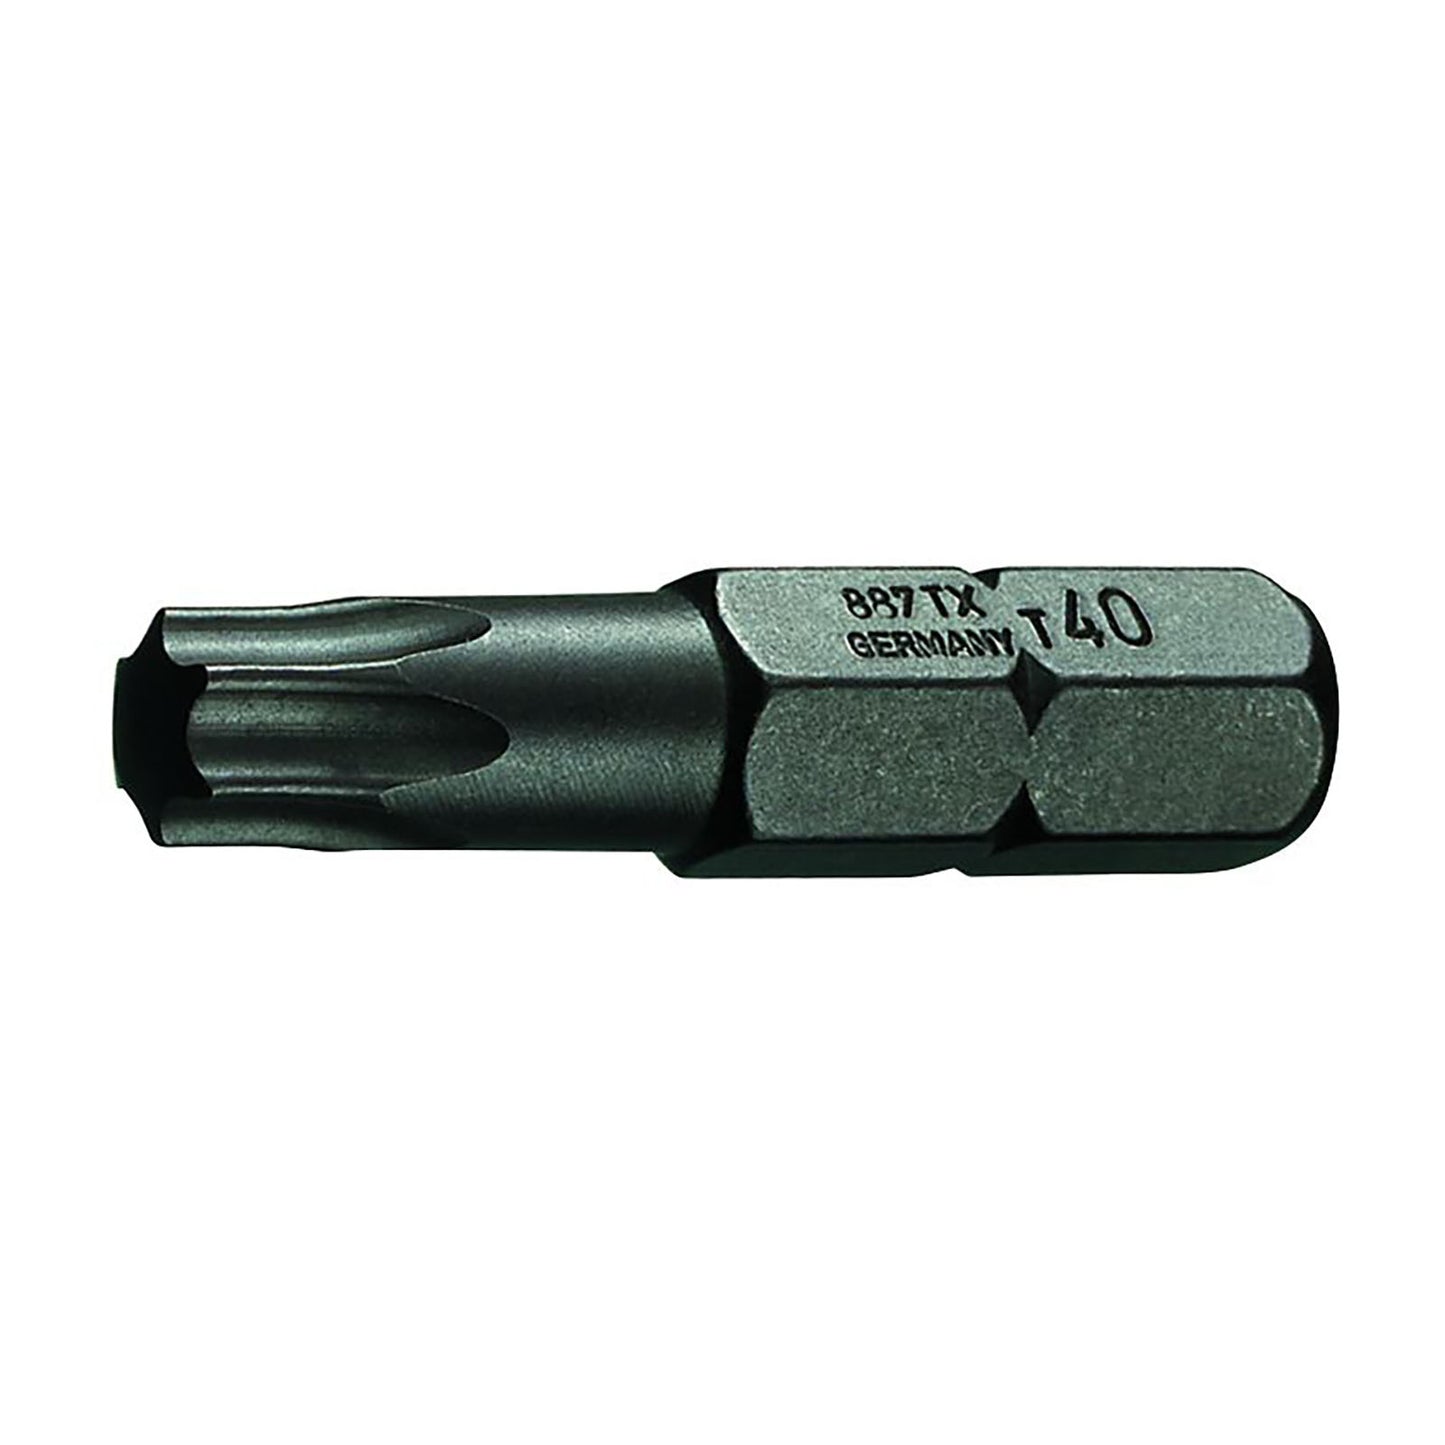 GEDORE 687 TX T40 S-010 - Embout TORX® 1/4", T40 (6542990)